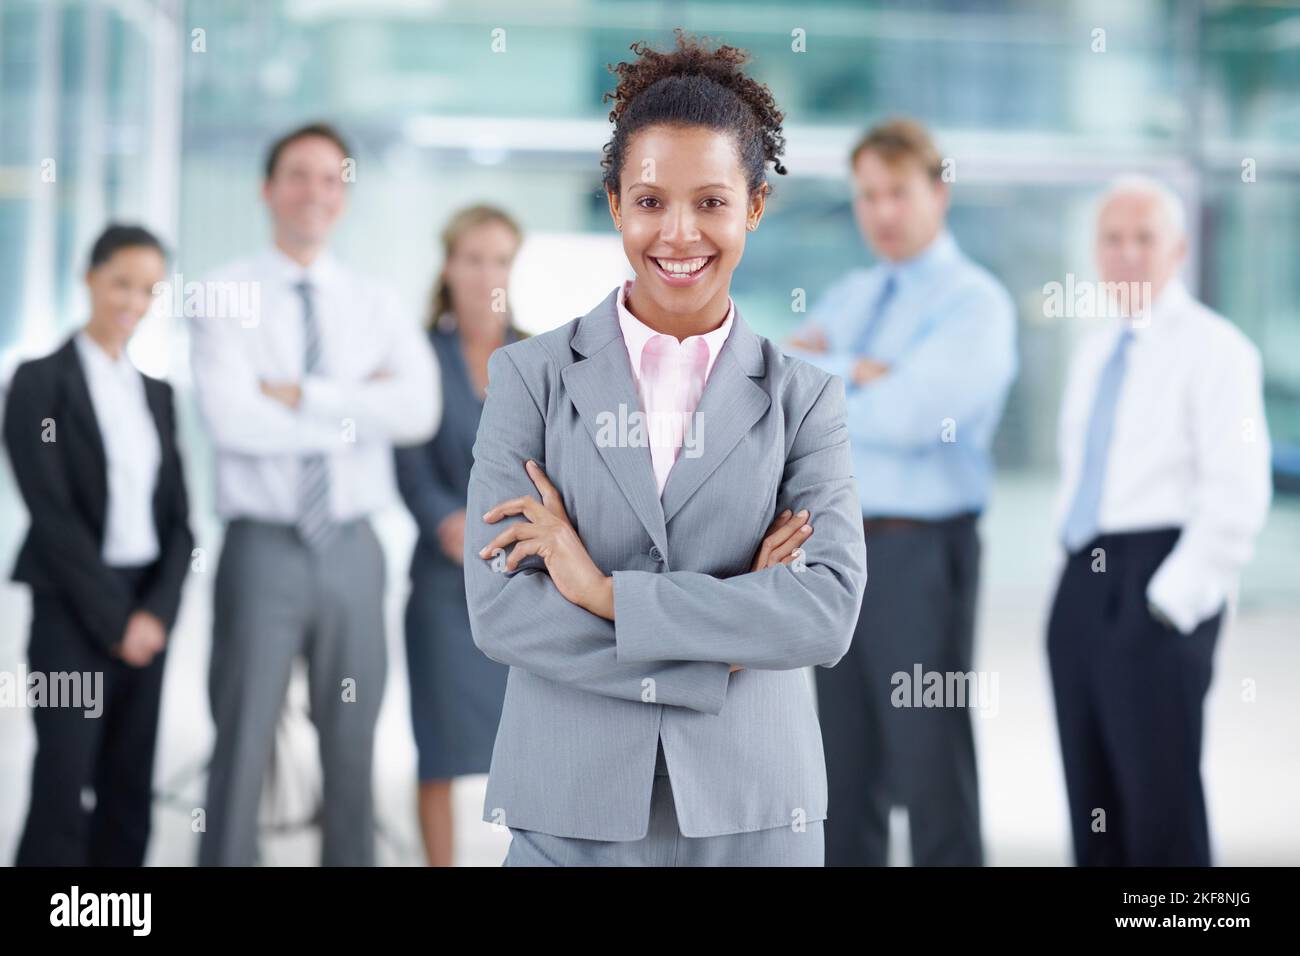 Shes climbing the corporate ladder with a smile. Smiling young African businesswoman standing with her coworkers behind her - portrait. Stock Photo